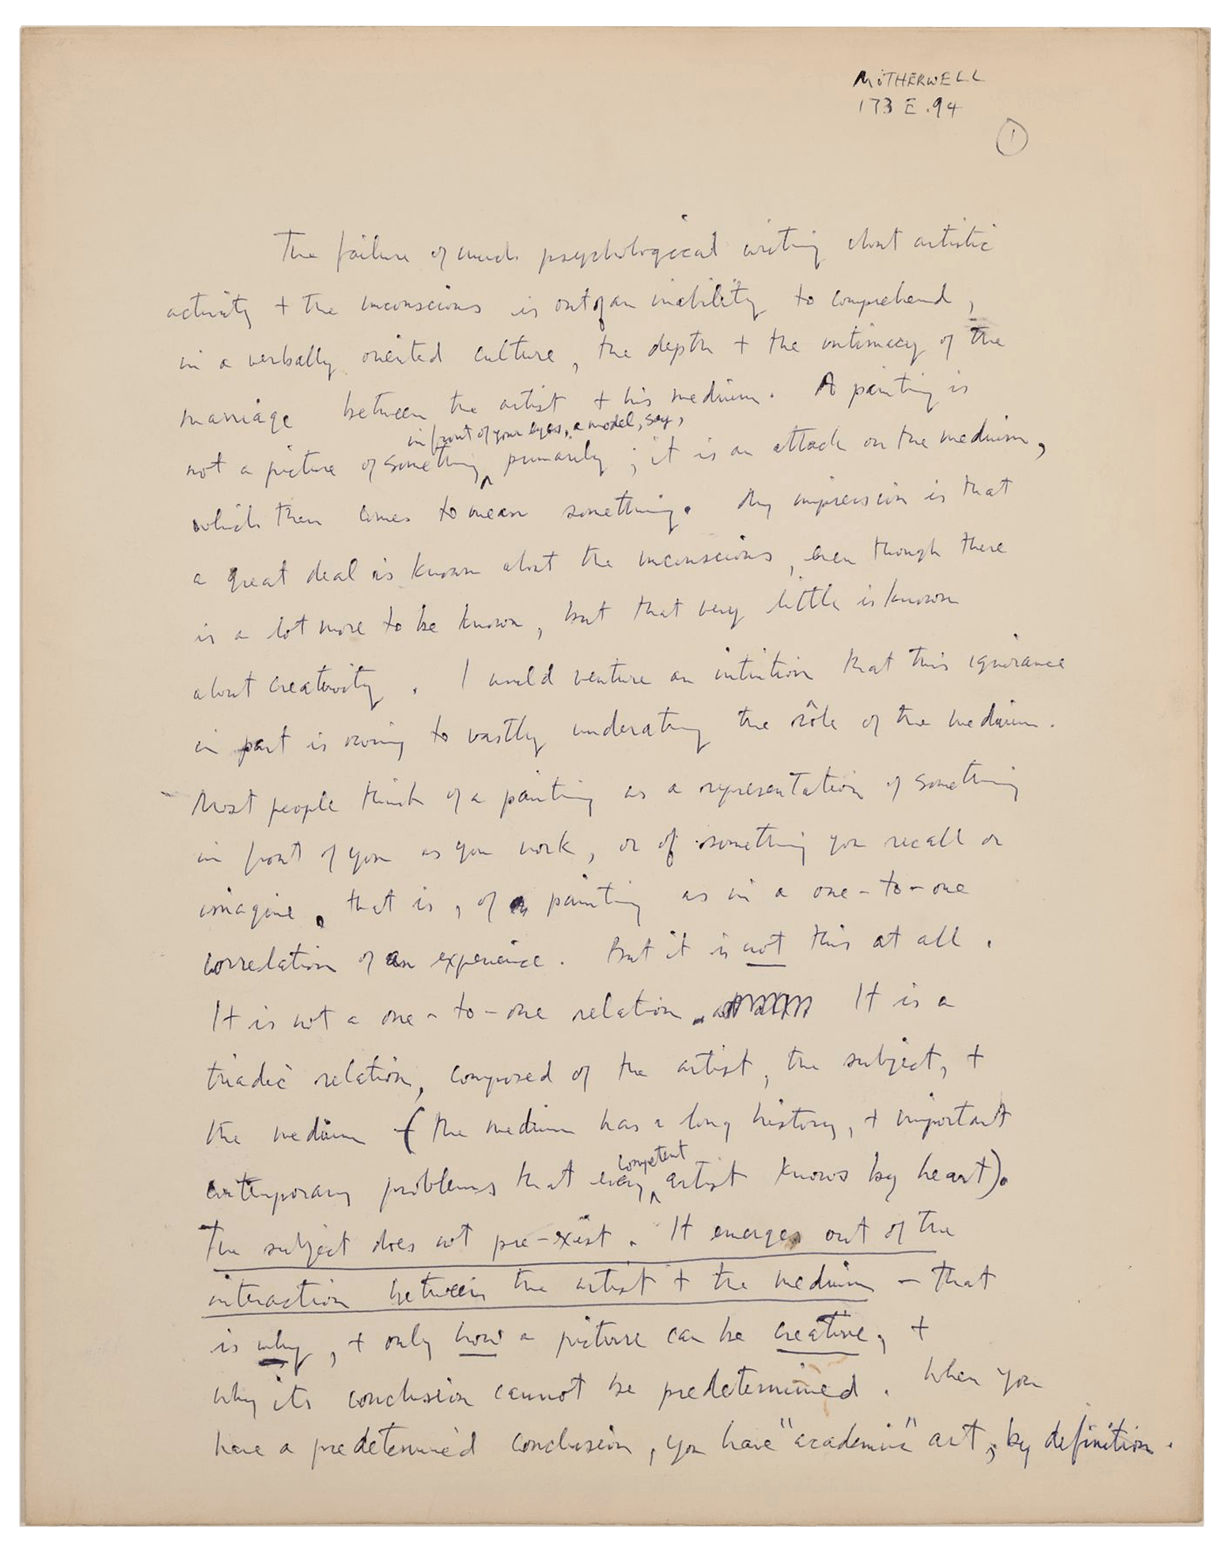 A page from Motherwell's handwritten draft of "A Process of Painting", 1963